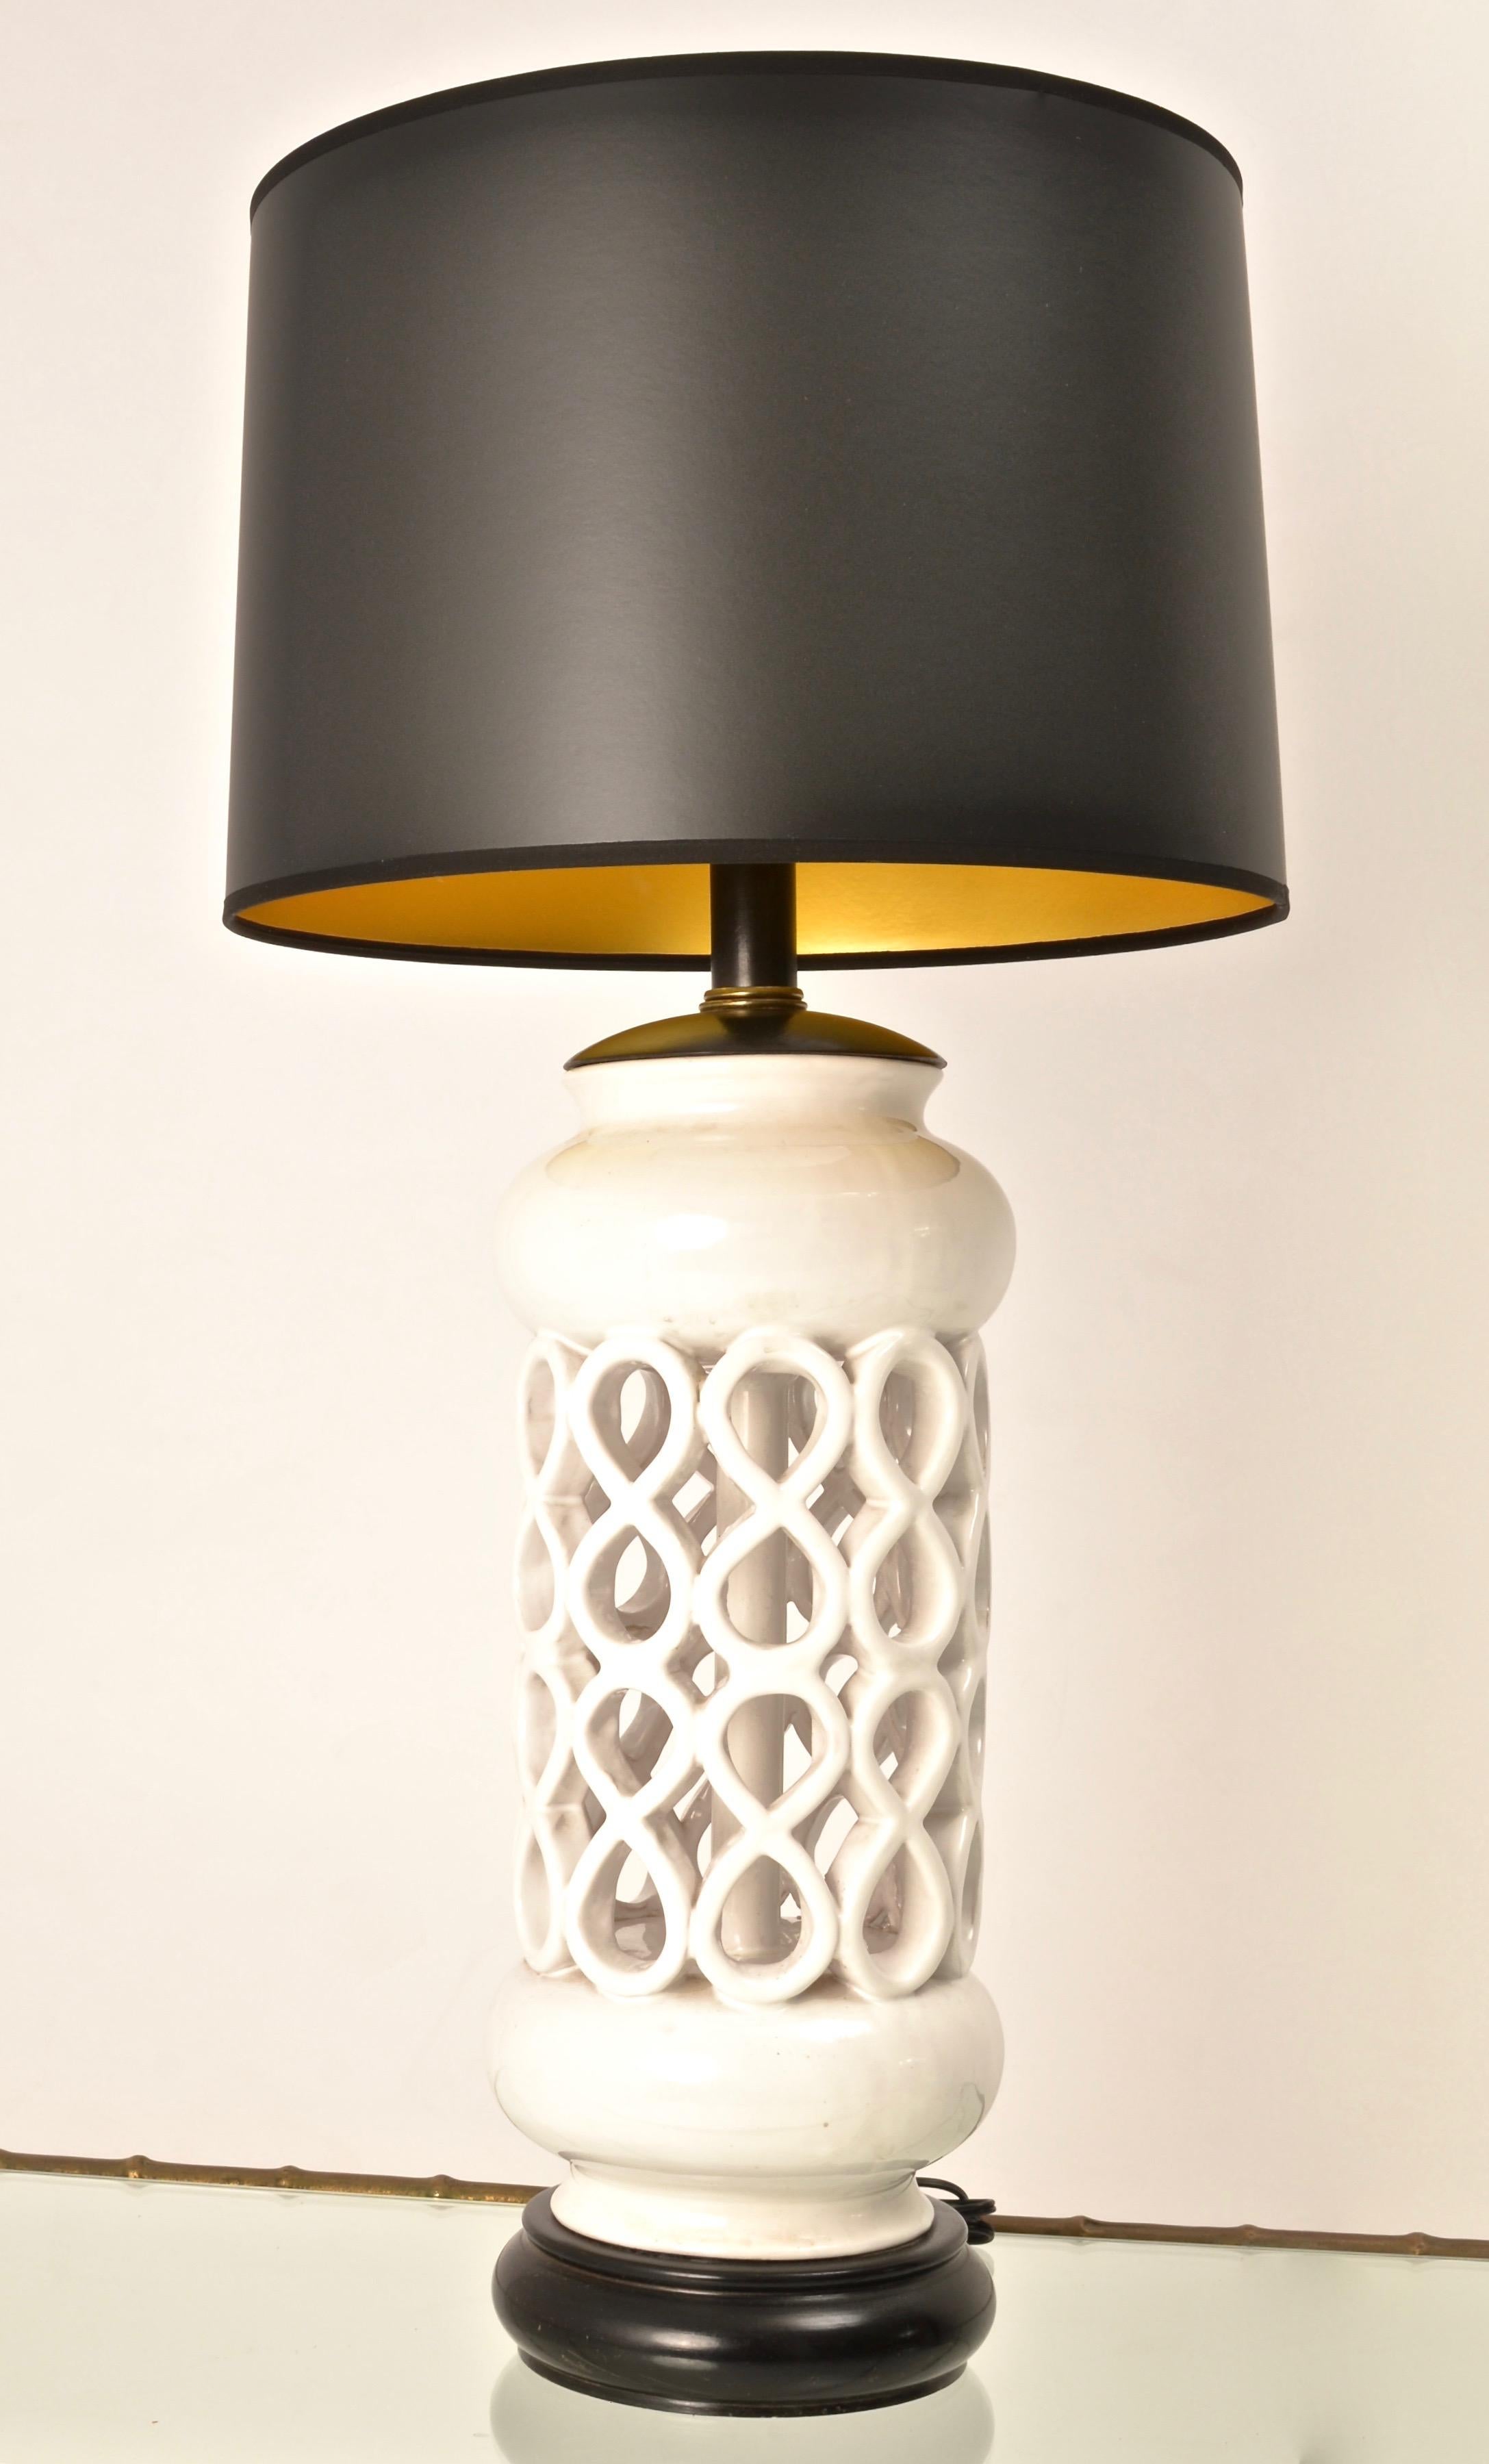 Very Palm Springs! Super glam. A sculptural Mid-Century Modern ceramic lamp, circa 1950s. Black and white chic with new wiring and a new black shade with gold liner. Lamp measures 10